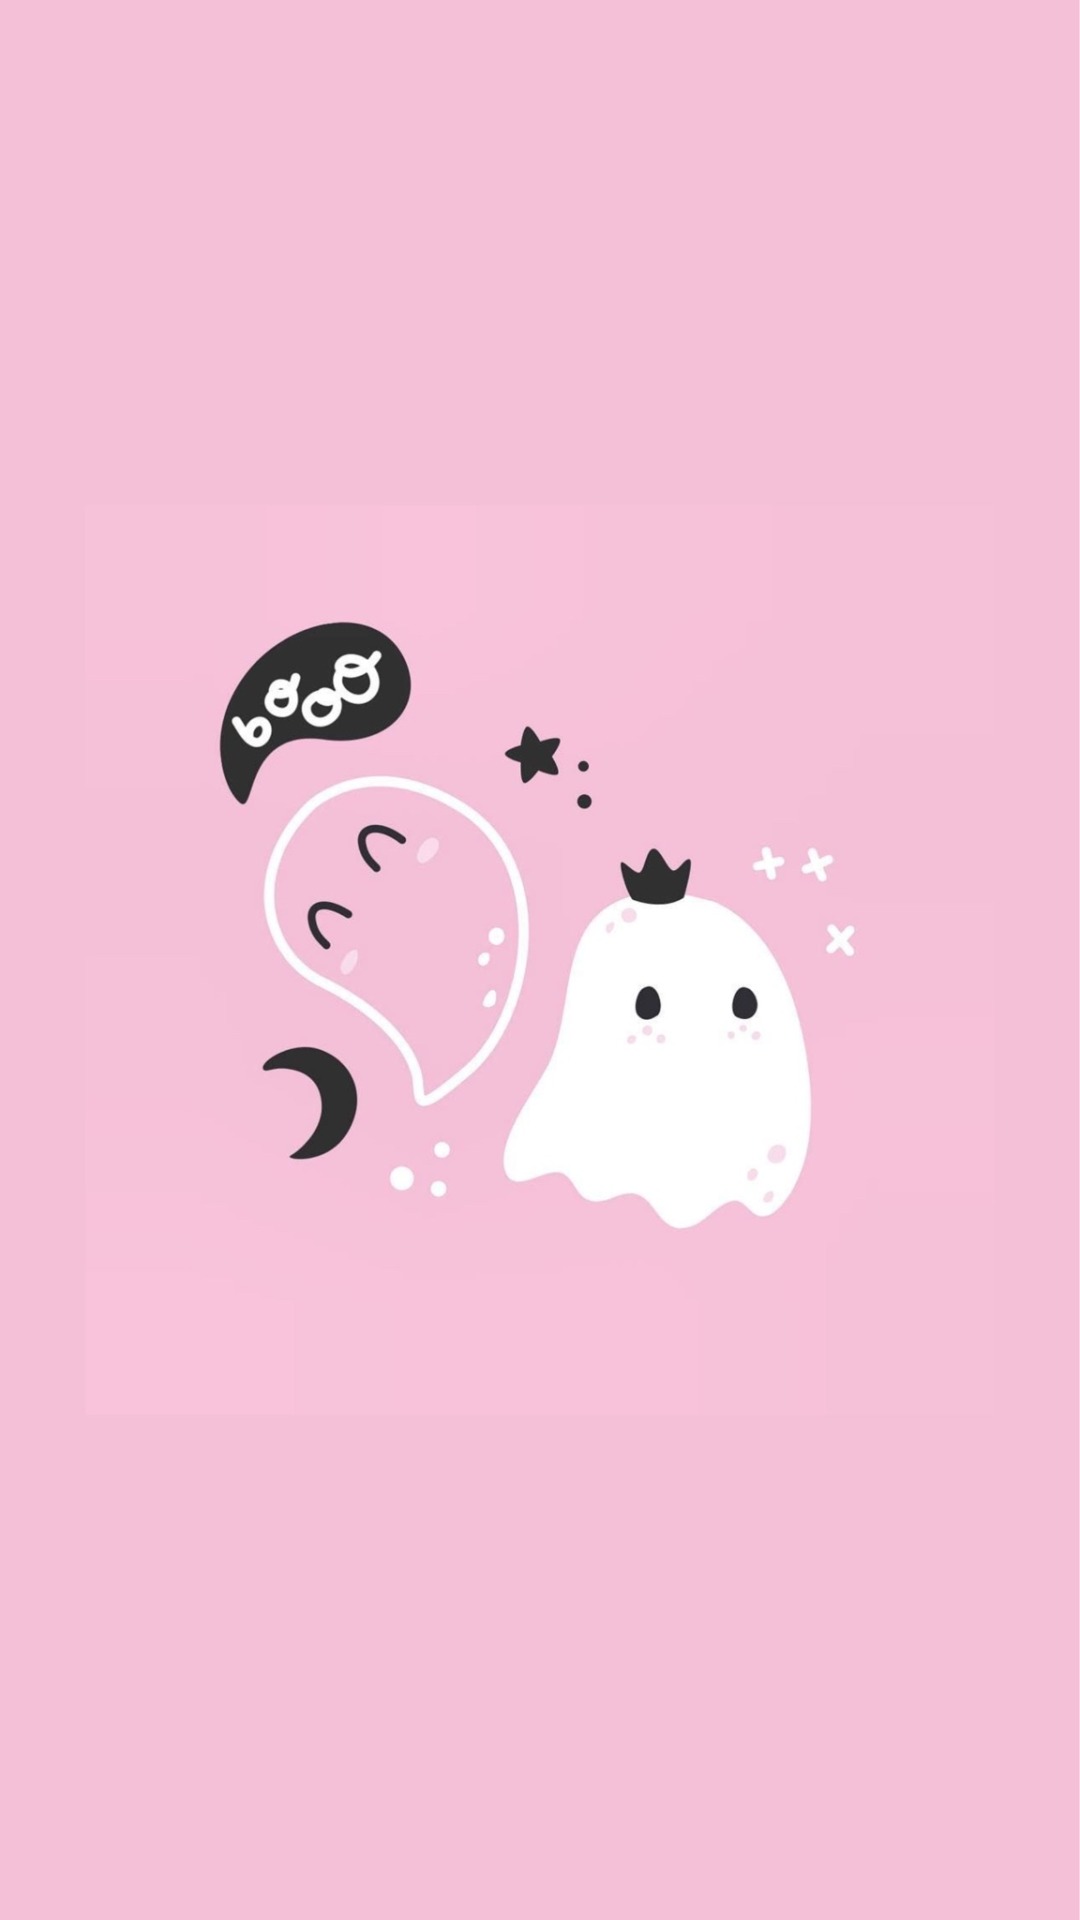 LadyGriffin's Home — Cute ghost wallpapers if anyone wants them 👻🖤